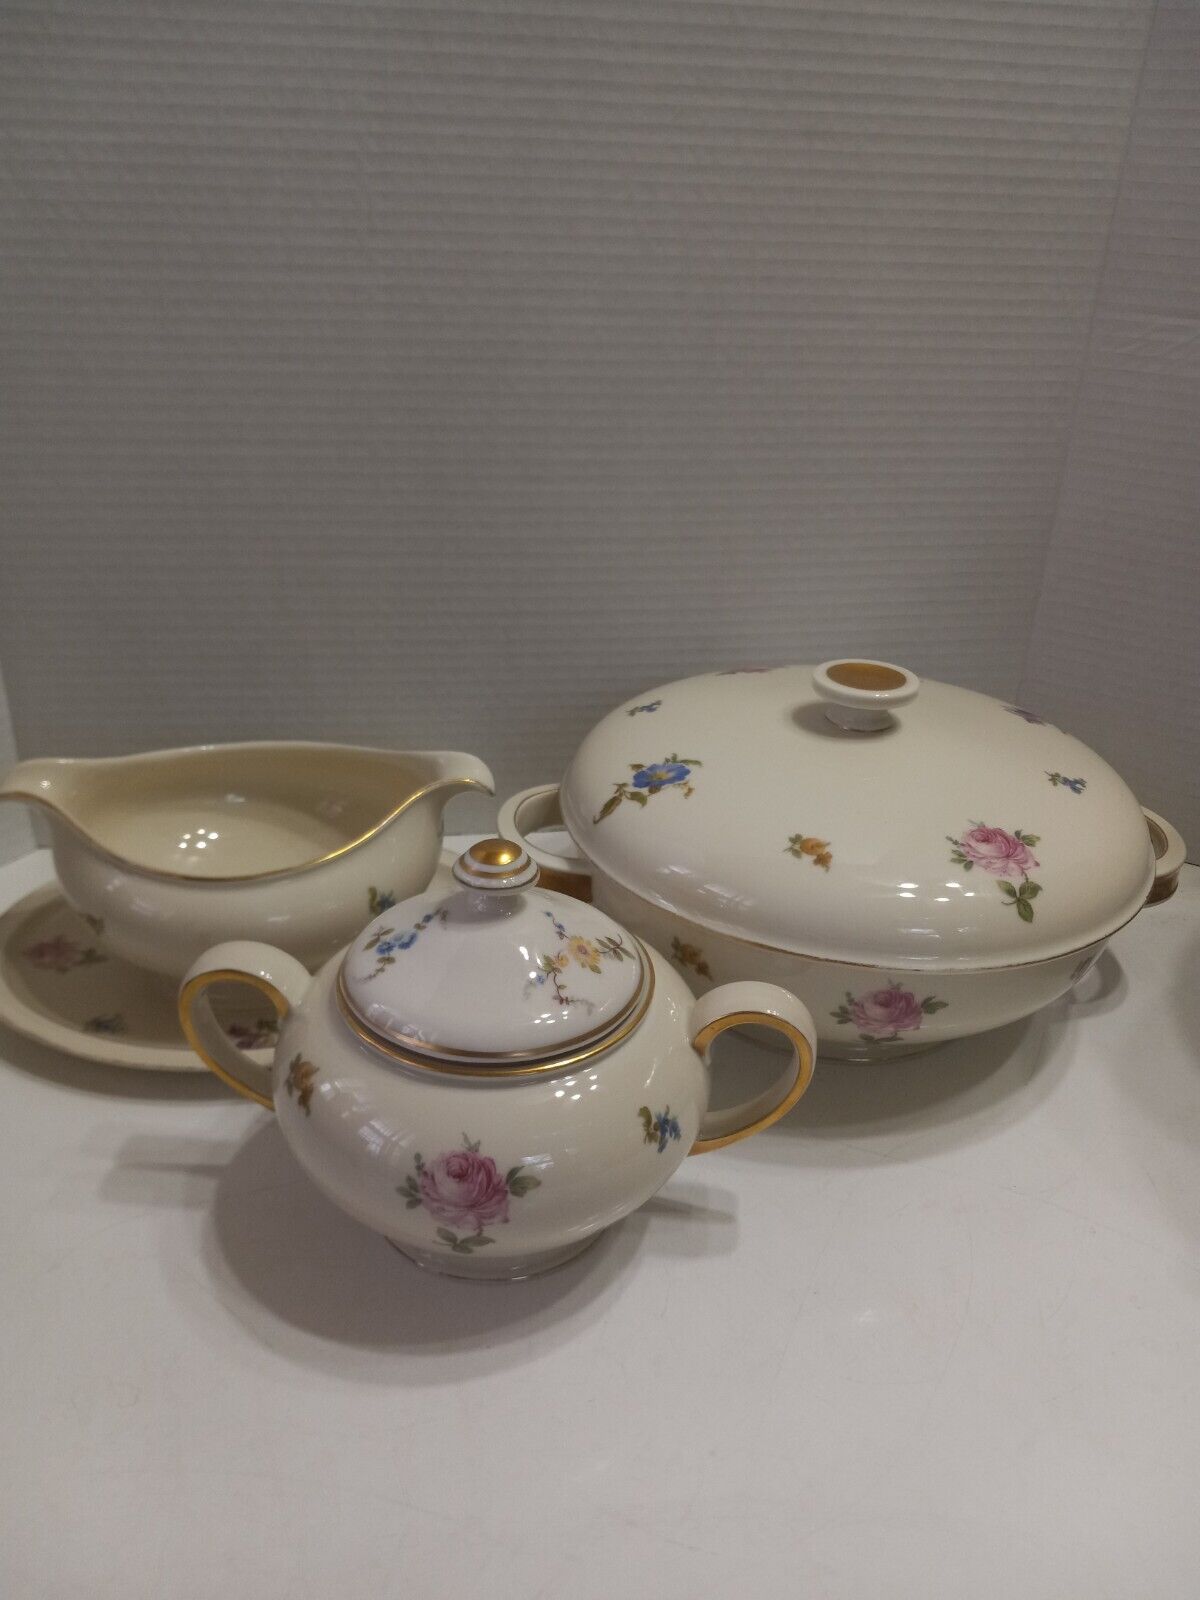 Rosenthal Winifred Selb- Germany Covered Casserole, Gravy Boat, Sugar Bowl With